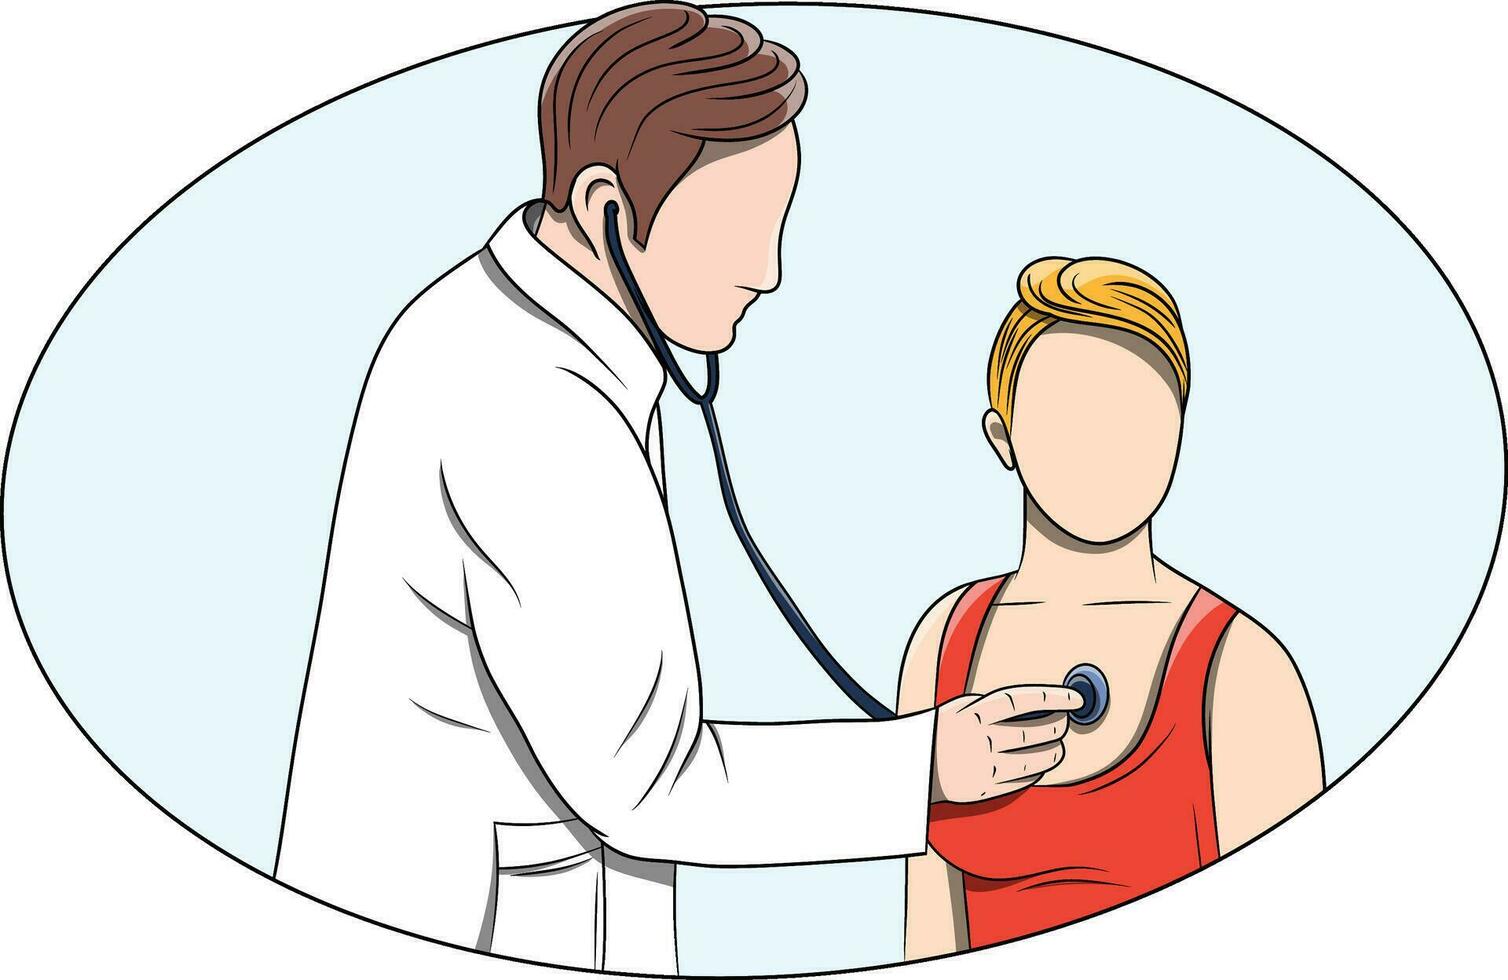 An Illustration Of A Medical Doctor Examining a Patient Using A Stethoscope vector